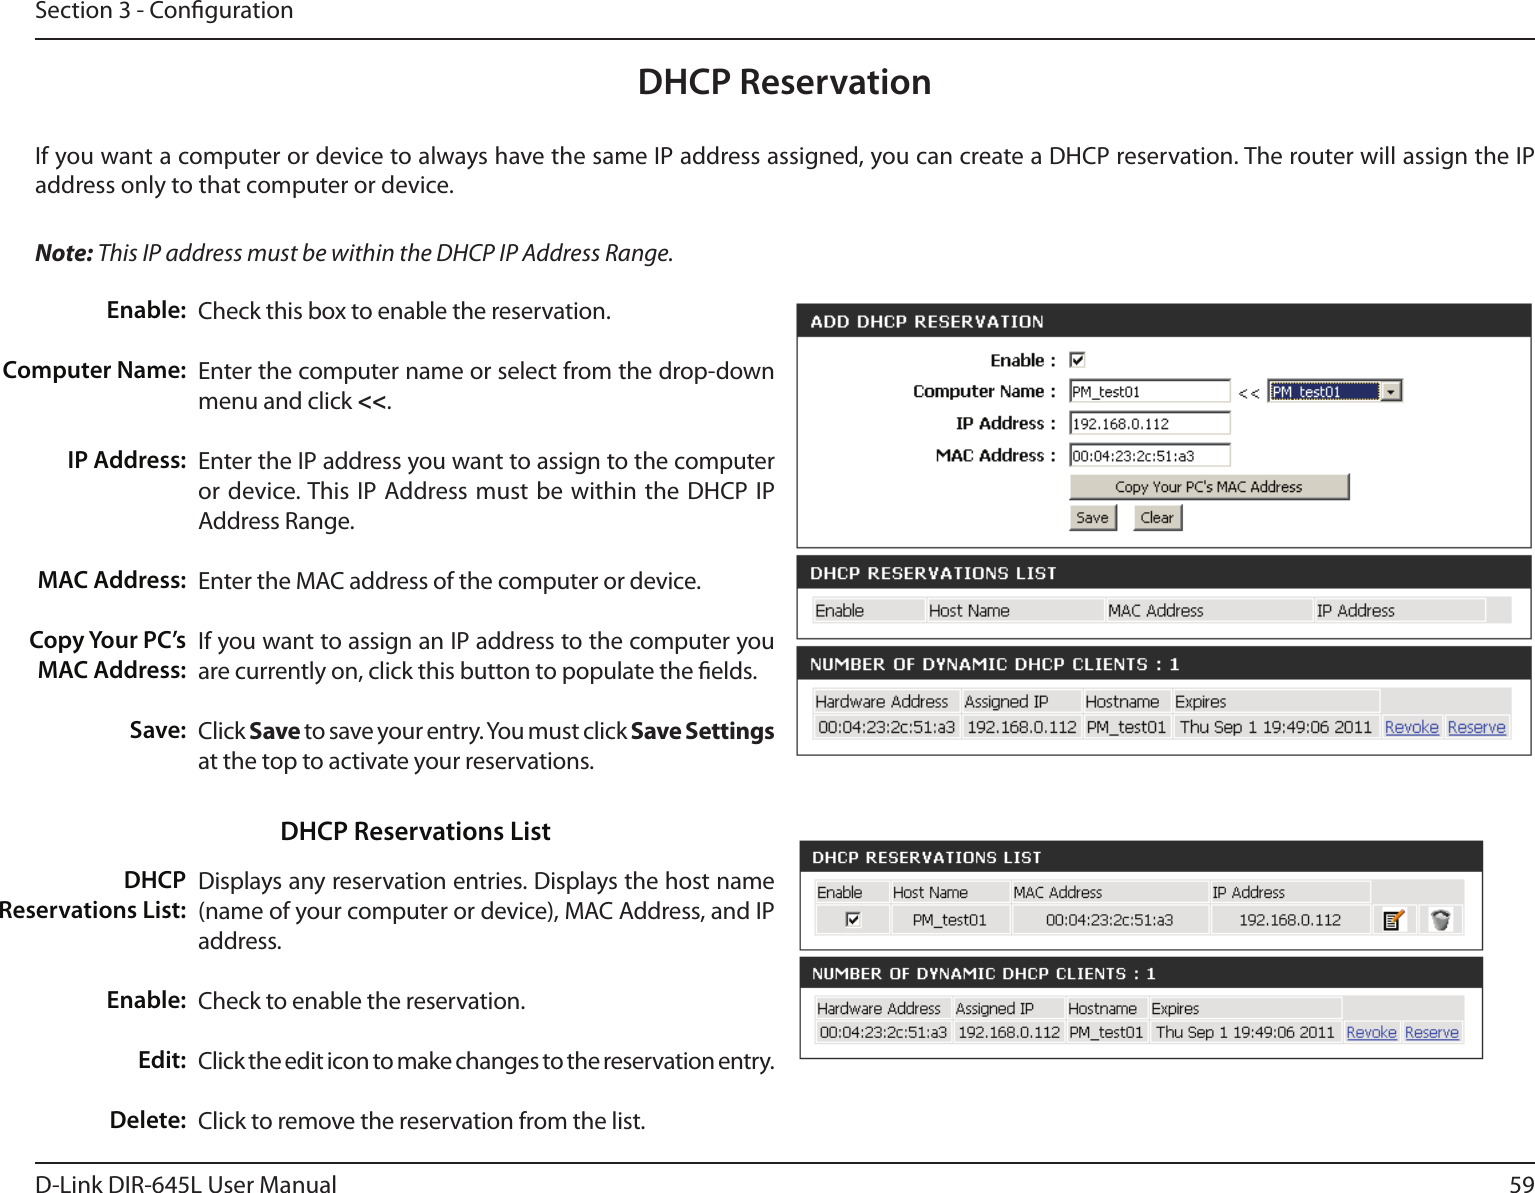 59D-Link DIR-645L User ManualSection 3 - CongurationDHCP ReservationIf you want a computer or device to always have the same IP address assigned, you can create a DHCP reservation. The router will assign the IP address only to that computer or device. Note: This IP address must be within the DHCP IP Address Range.Check this box to enable the reservation.Enter the computer name or select from the drop-down menu and click &lt;&lt;.Enter the IP address you want to assign to the computer or device. This IP Address must be within the  DHCP IP Address Range.Enter the MAC address of the computer or device.If you want to assign an IP address to the computer you are currently on, click this button to populate the elds. Click Save to save your entry. You must click Save Settings at the top to activate your reservations. Displays any reservation entries. Displays the host name (name of your computer or device), MAC Address, and IP address.Check to enable the reservation.Click the edit icon to make changes to the reservation entry.Click to remove the reservation from the list.Enable:Computer Name:IP Address:MAC Address:Copy Your PC’s MAC Address:Save:DHCP Reservations List:Enable:Edit:Delete:DHCP Reservations List